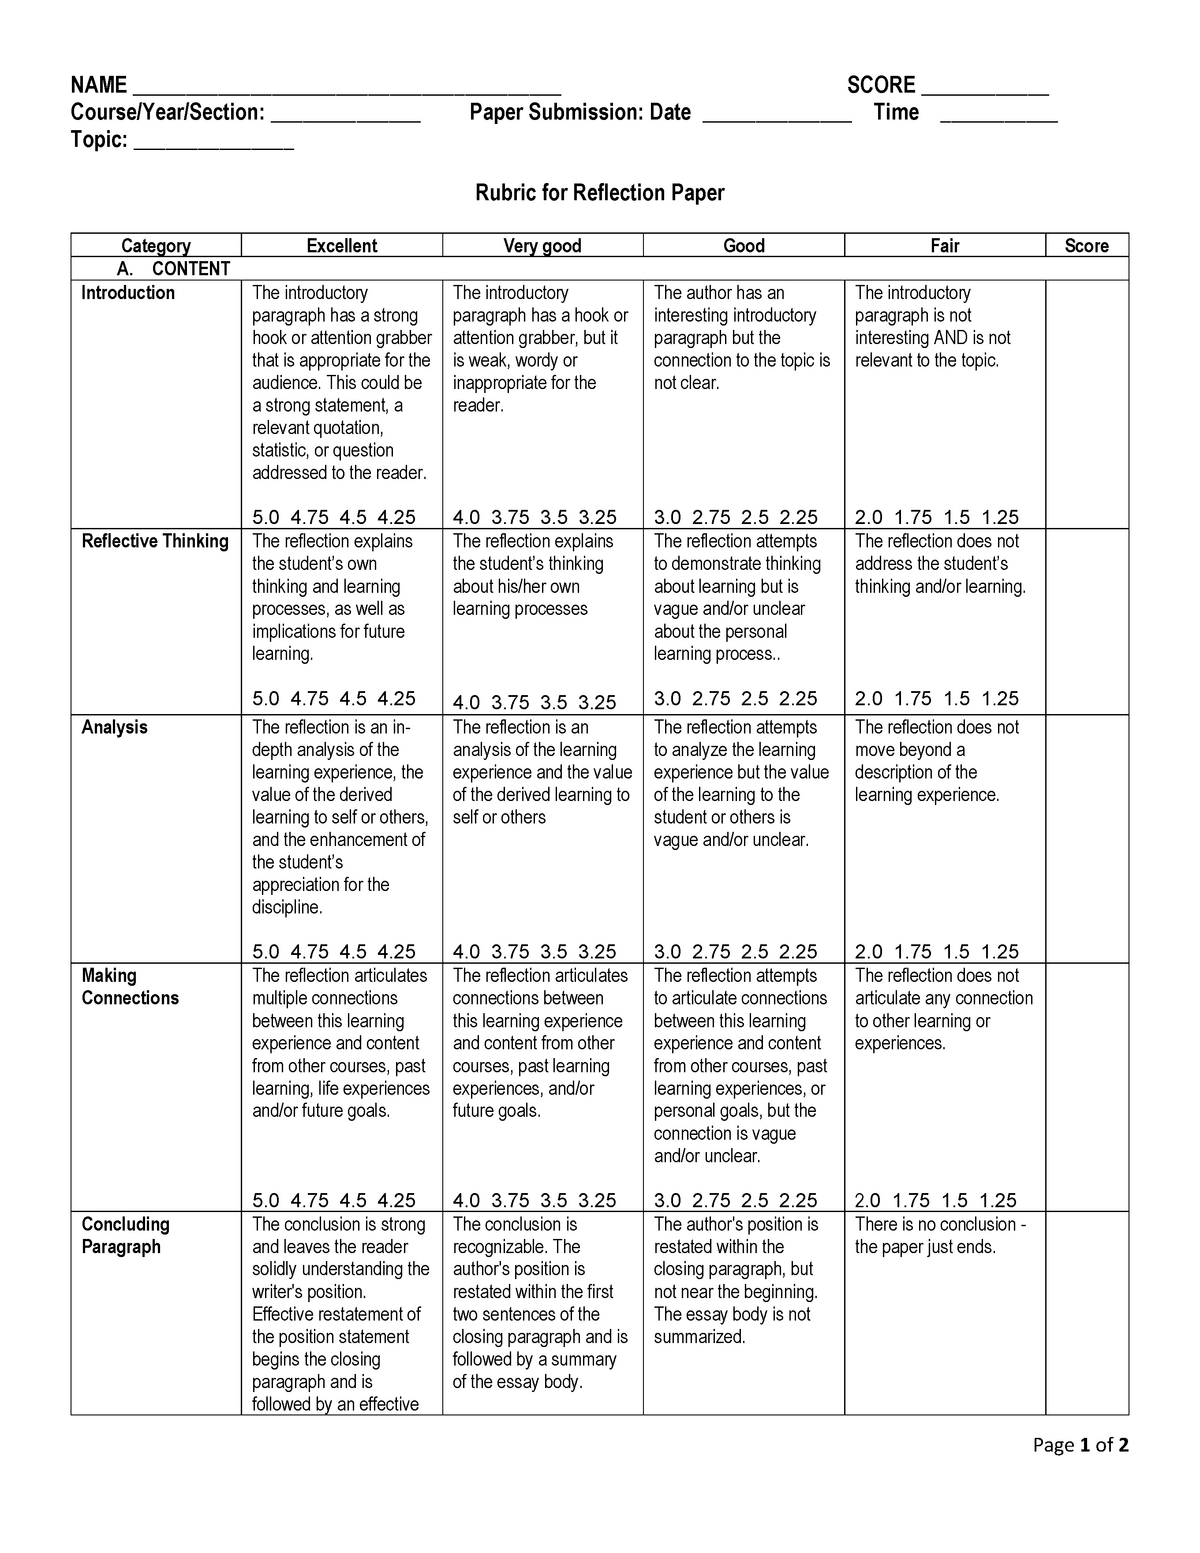 reflection assignment rubric